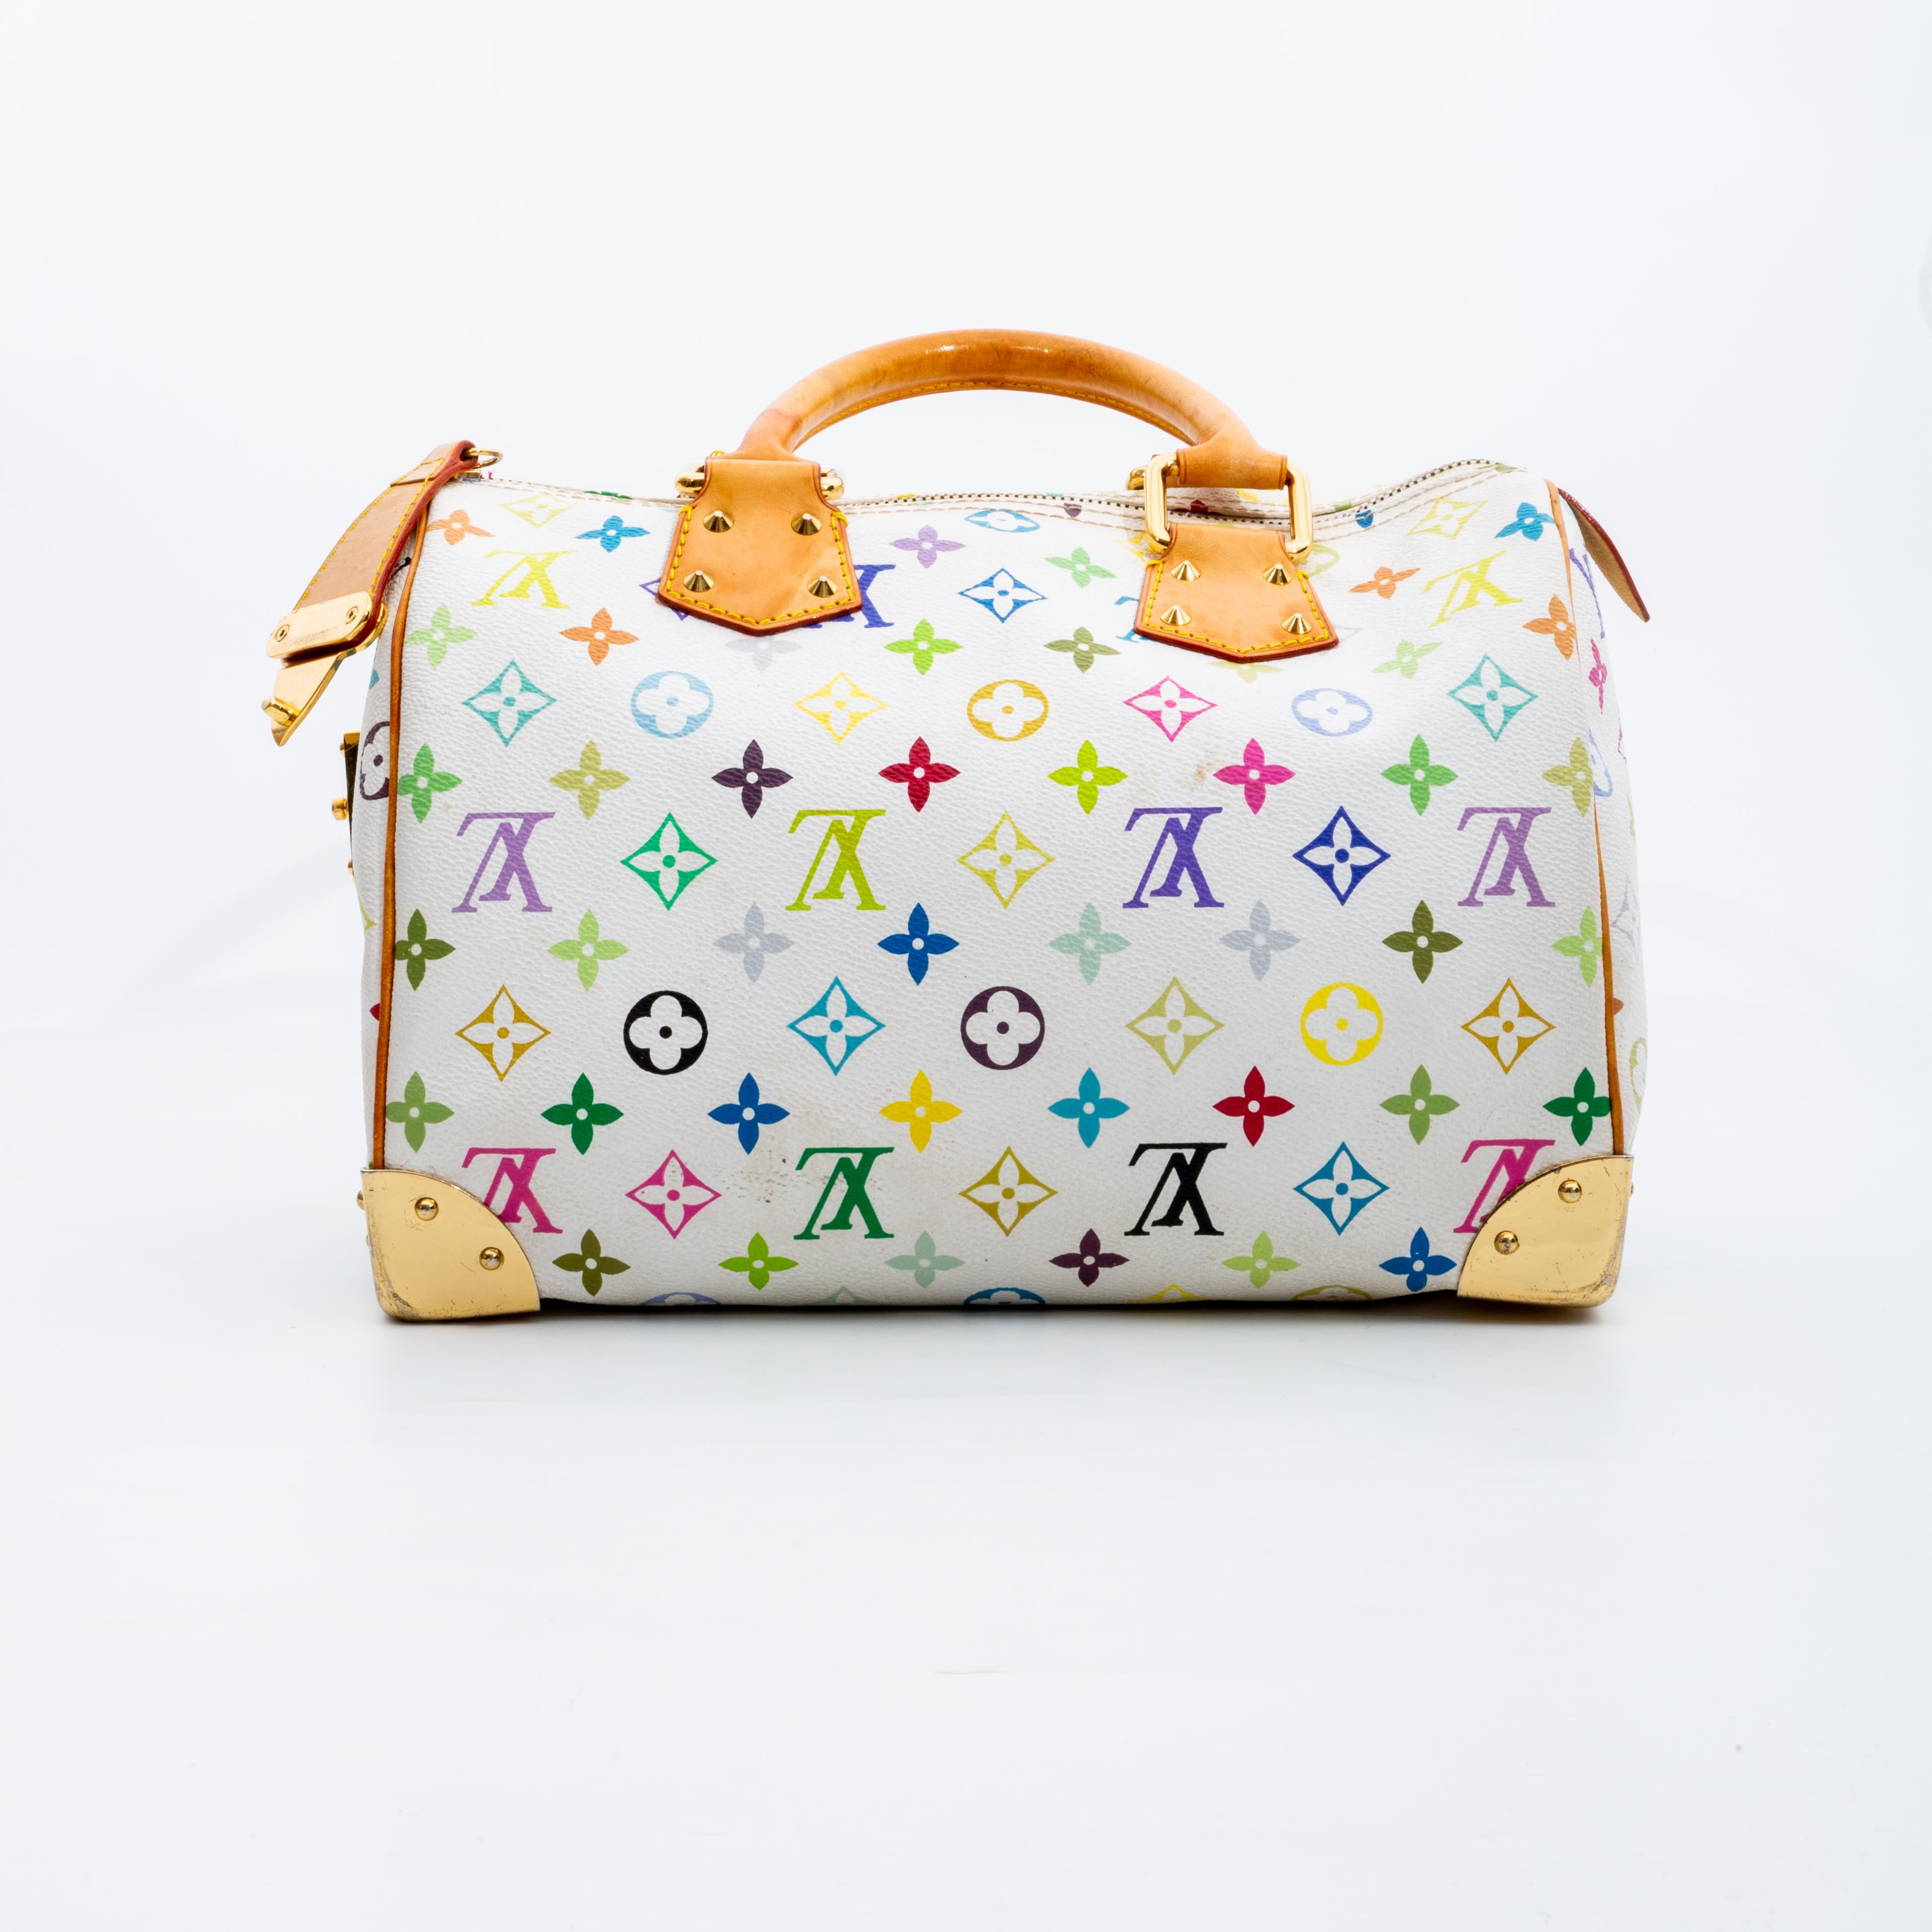 The Japanese pop artist Takashi Murakami worked to revamp the traditional monogram toile and give it a splash of colour. He created a new vibrant canvas with 33 colours on white canvas as seen in this iconic speedy bag.
This bag is made with white